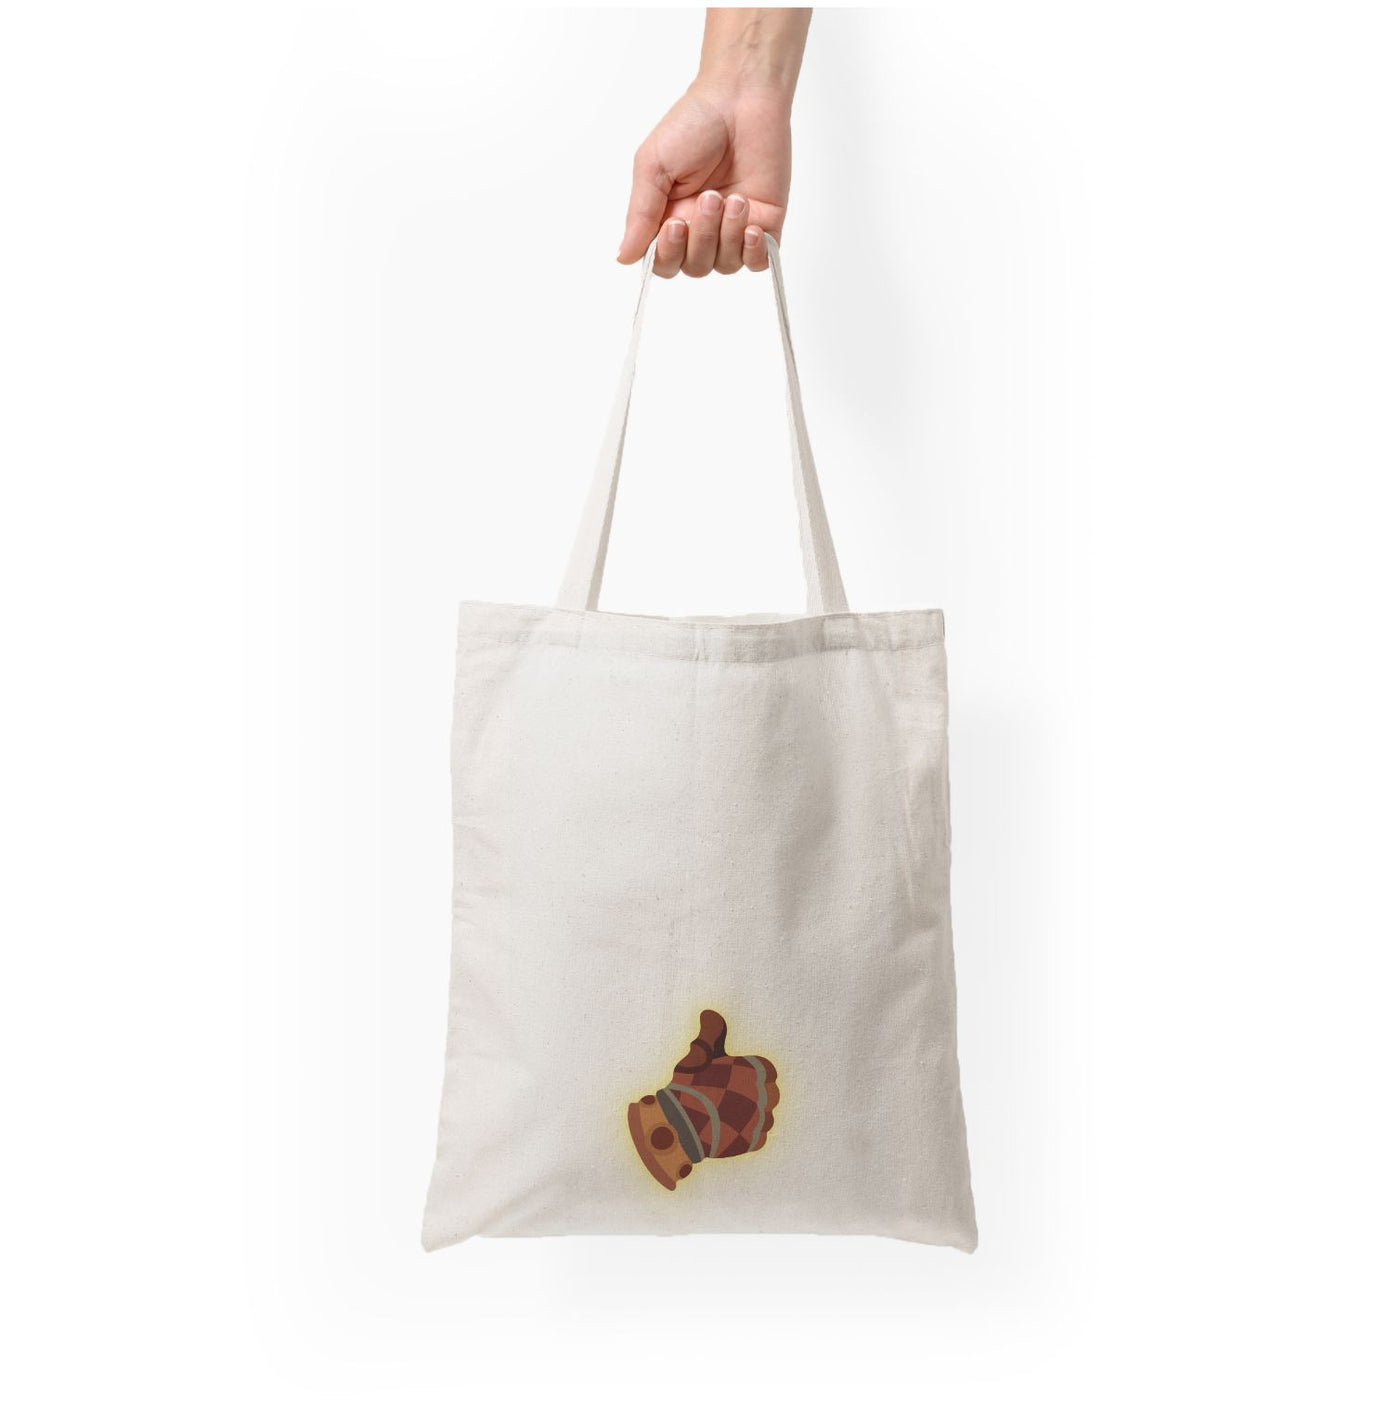 Thumbs Up - League Of Legends Tote Bag